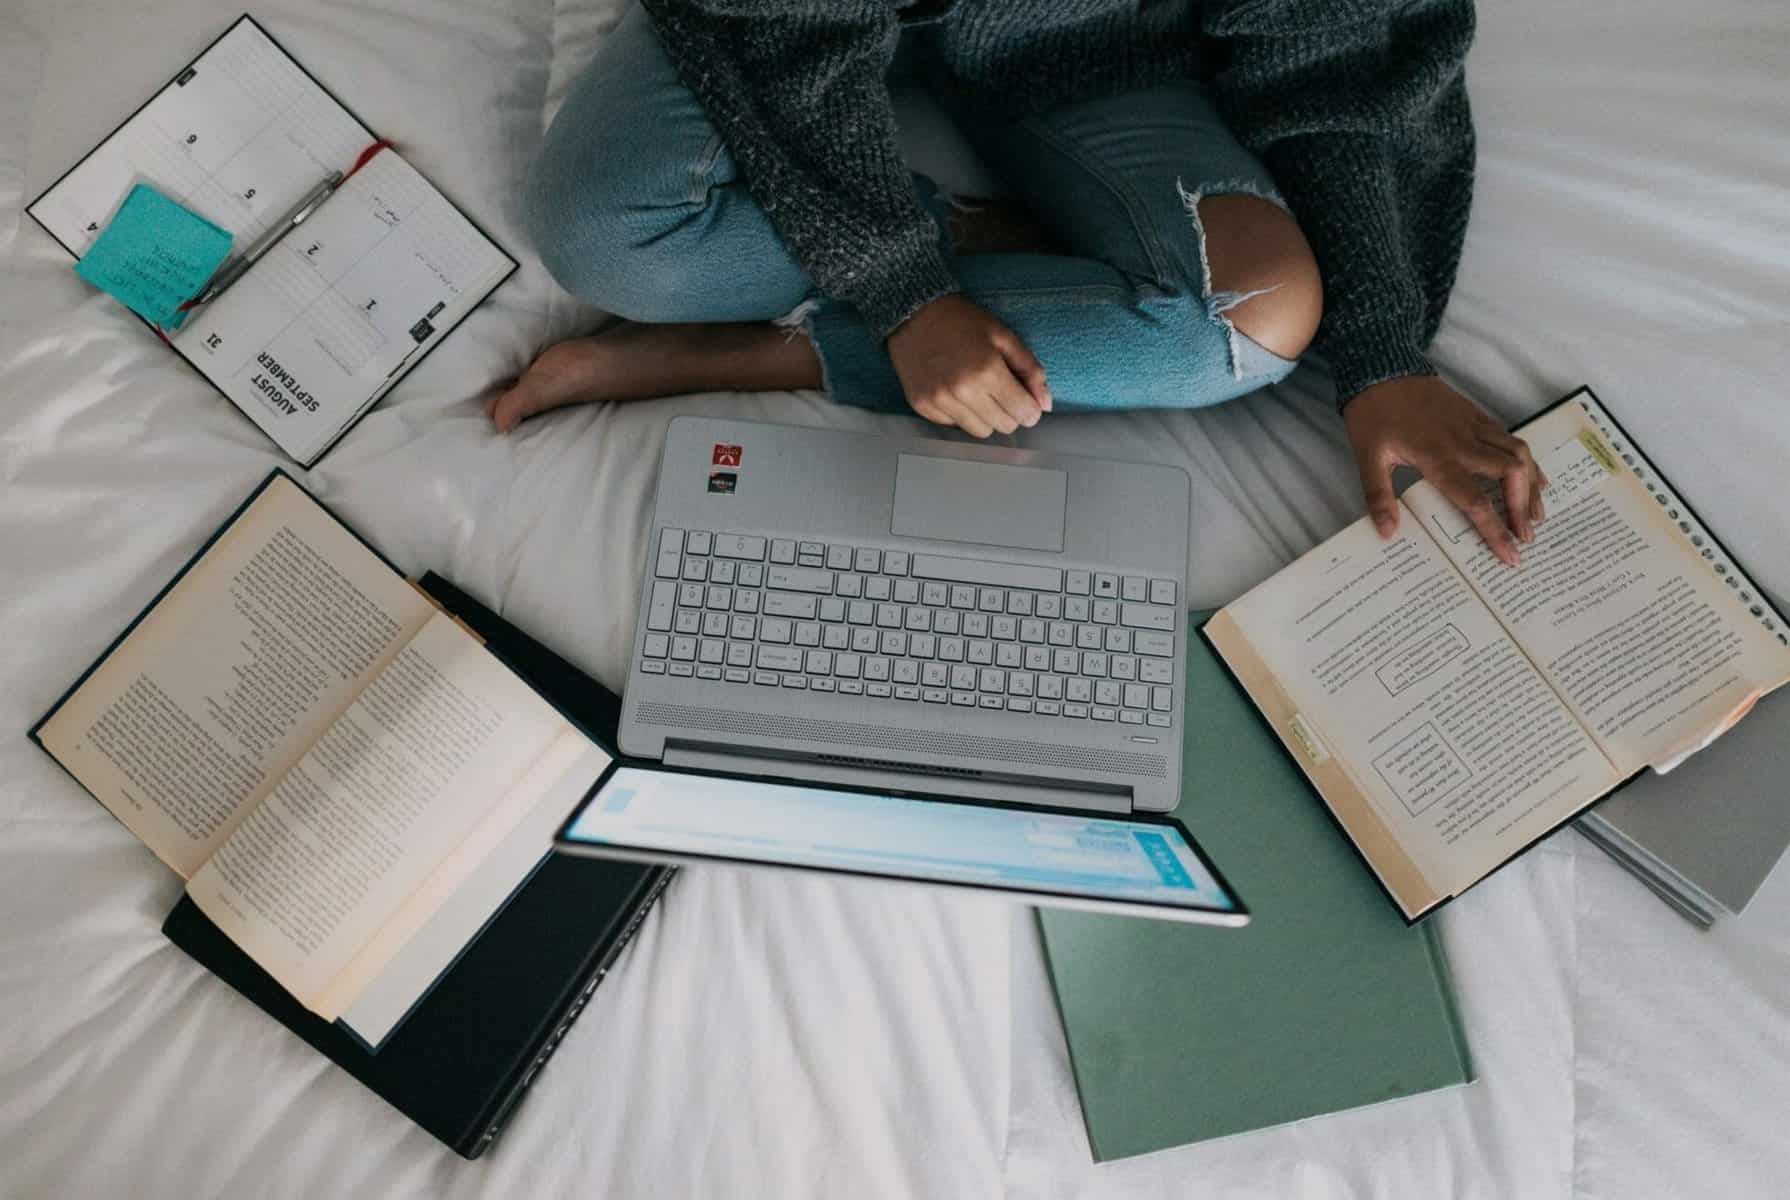 Student sitting on bed studying with books and laptop